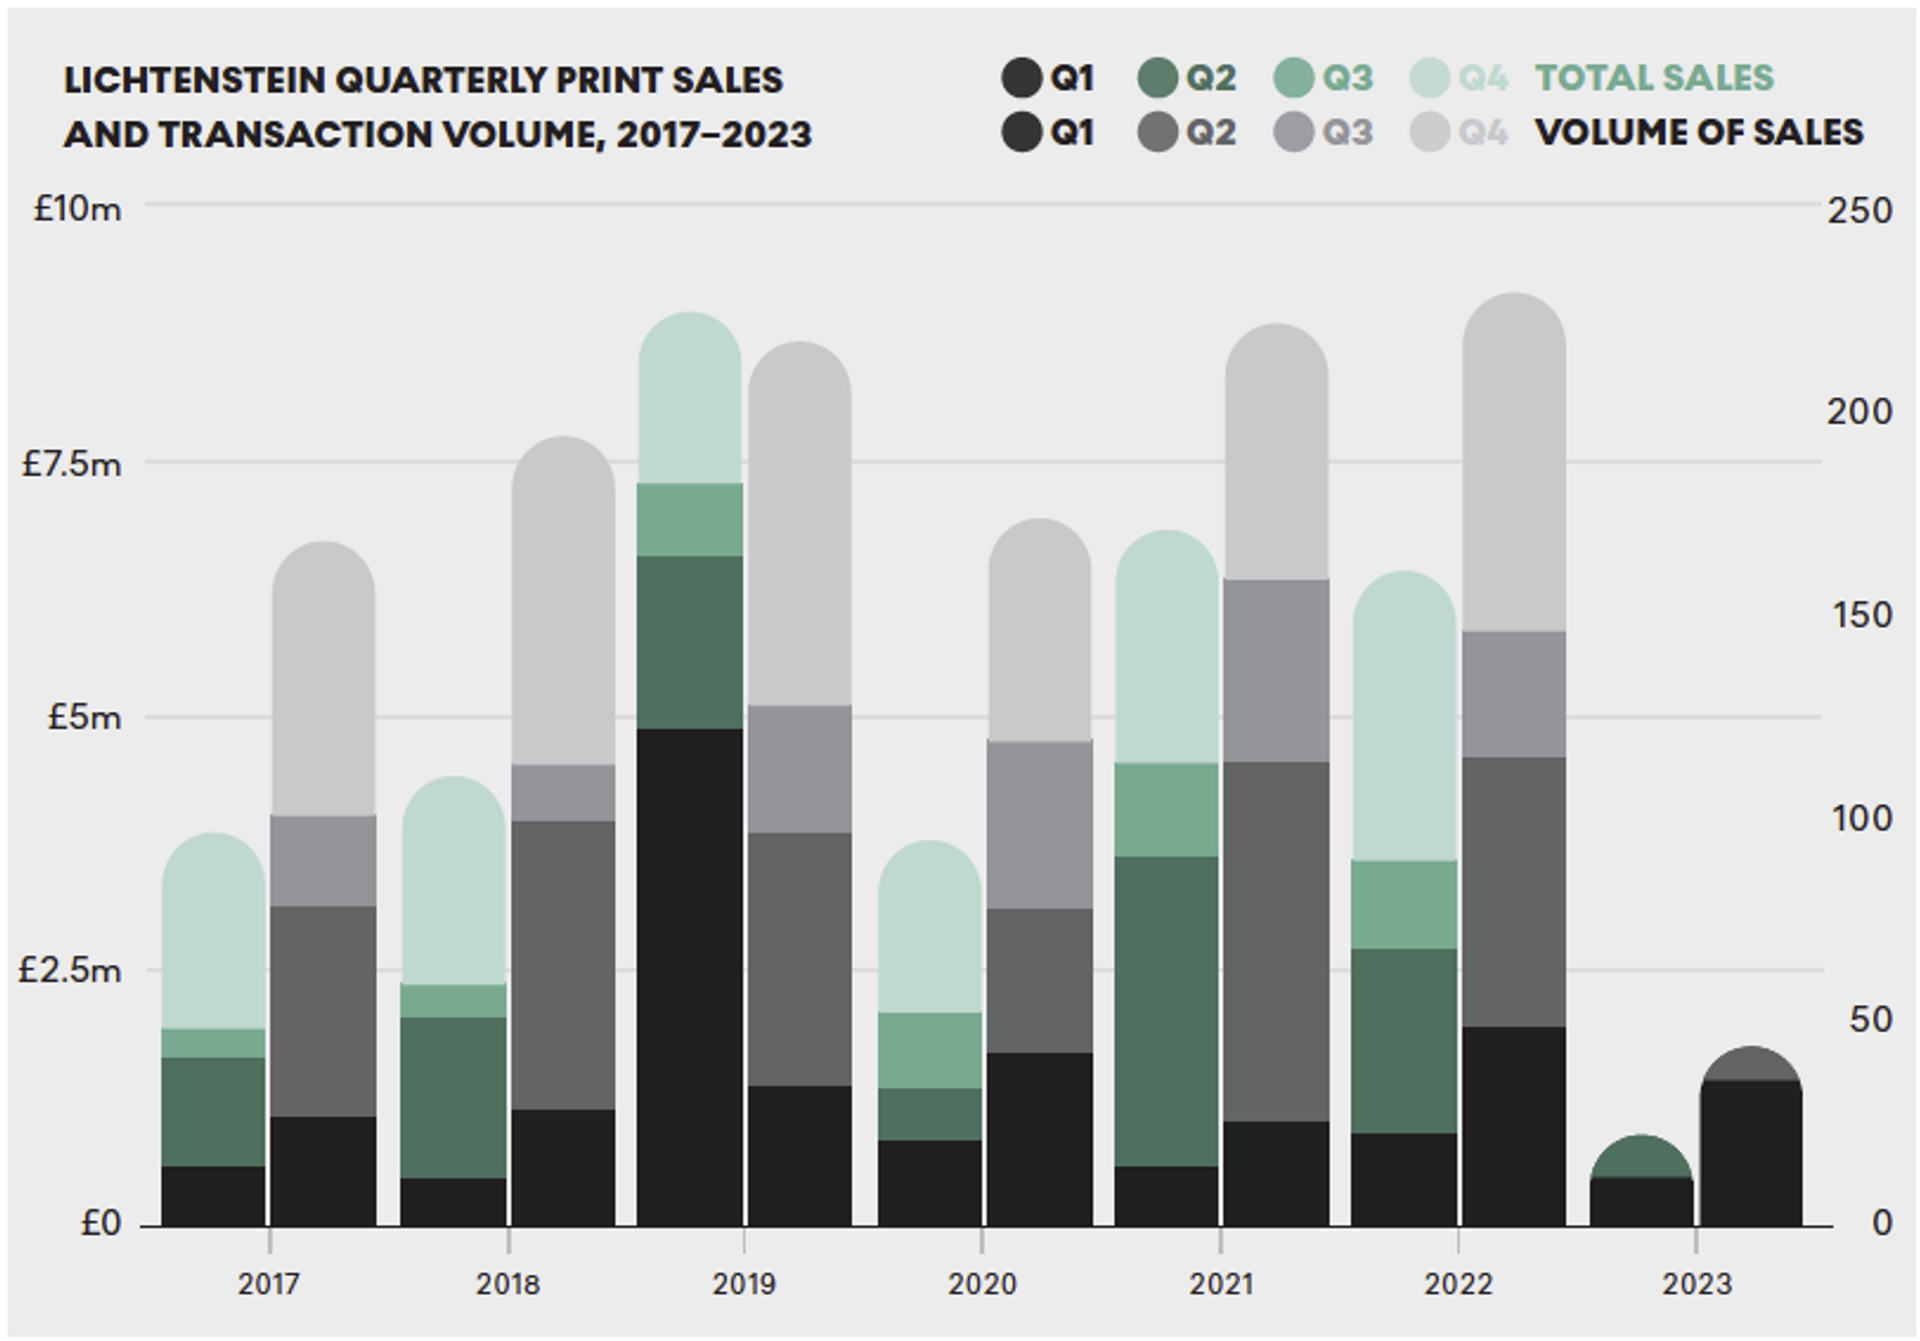 Stacked bar graph displaying the five-year quarterly performance of Roy Lichtenstein's art market. The graph shows the total print sales for each yearly quarter, represented by different colored bars, along with the transaction volume of sales. The data spans from 2017 to 2023.